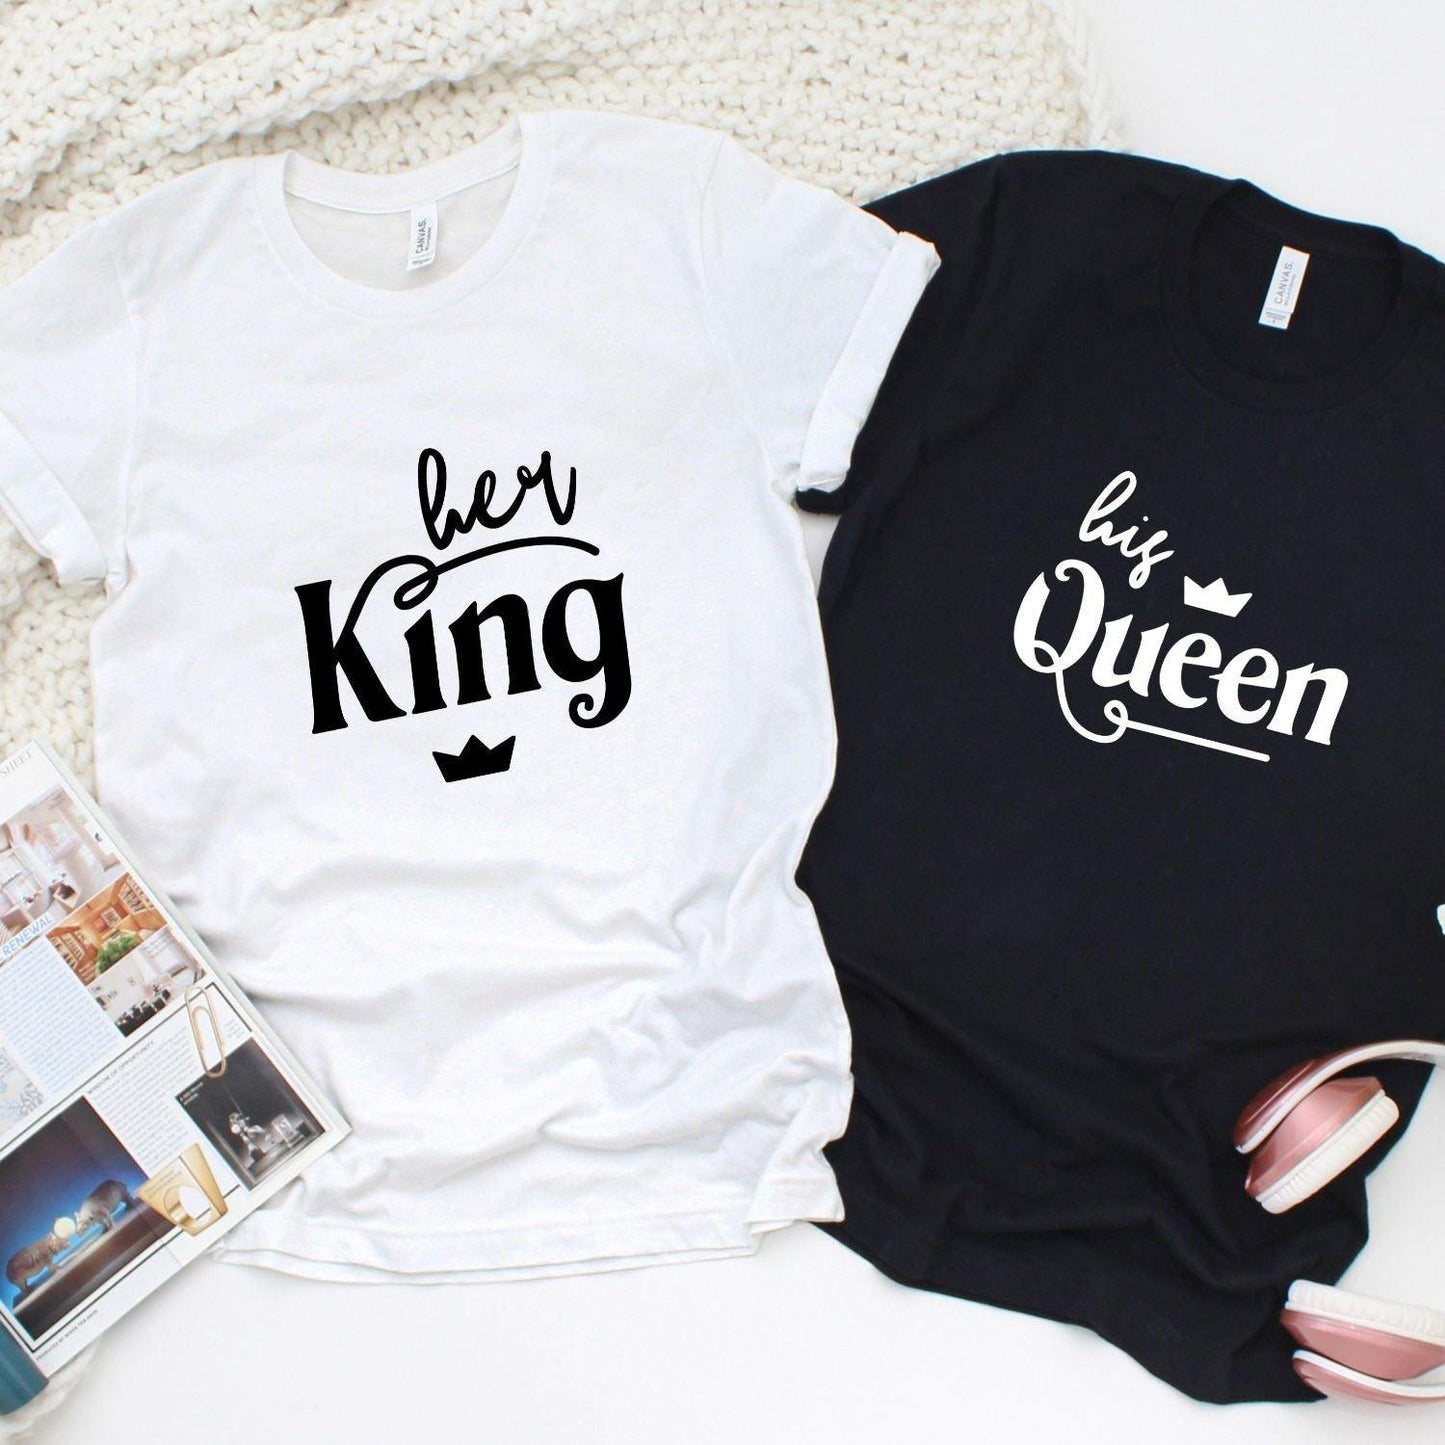 King & Queen Matching Outfits - Ideal Couples' Gift for Couples - 4Lovebirds